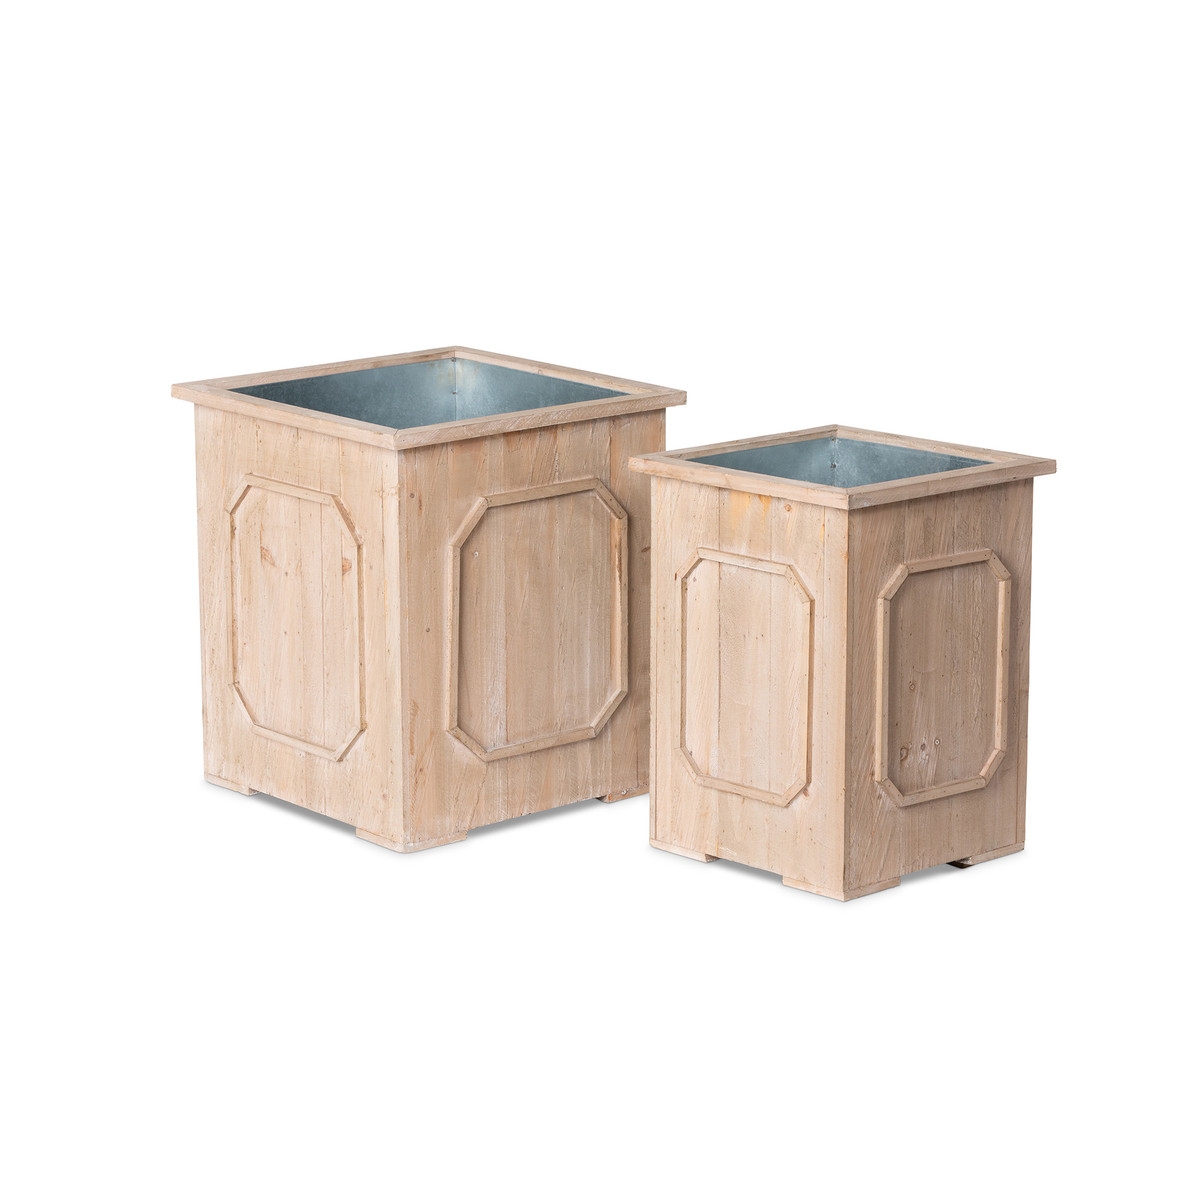 Reclaimed Wood Medallion Planters Set of 2/tin liners - Natural